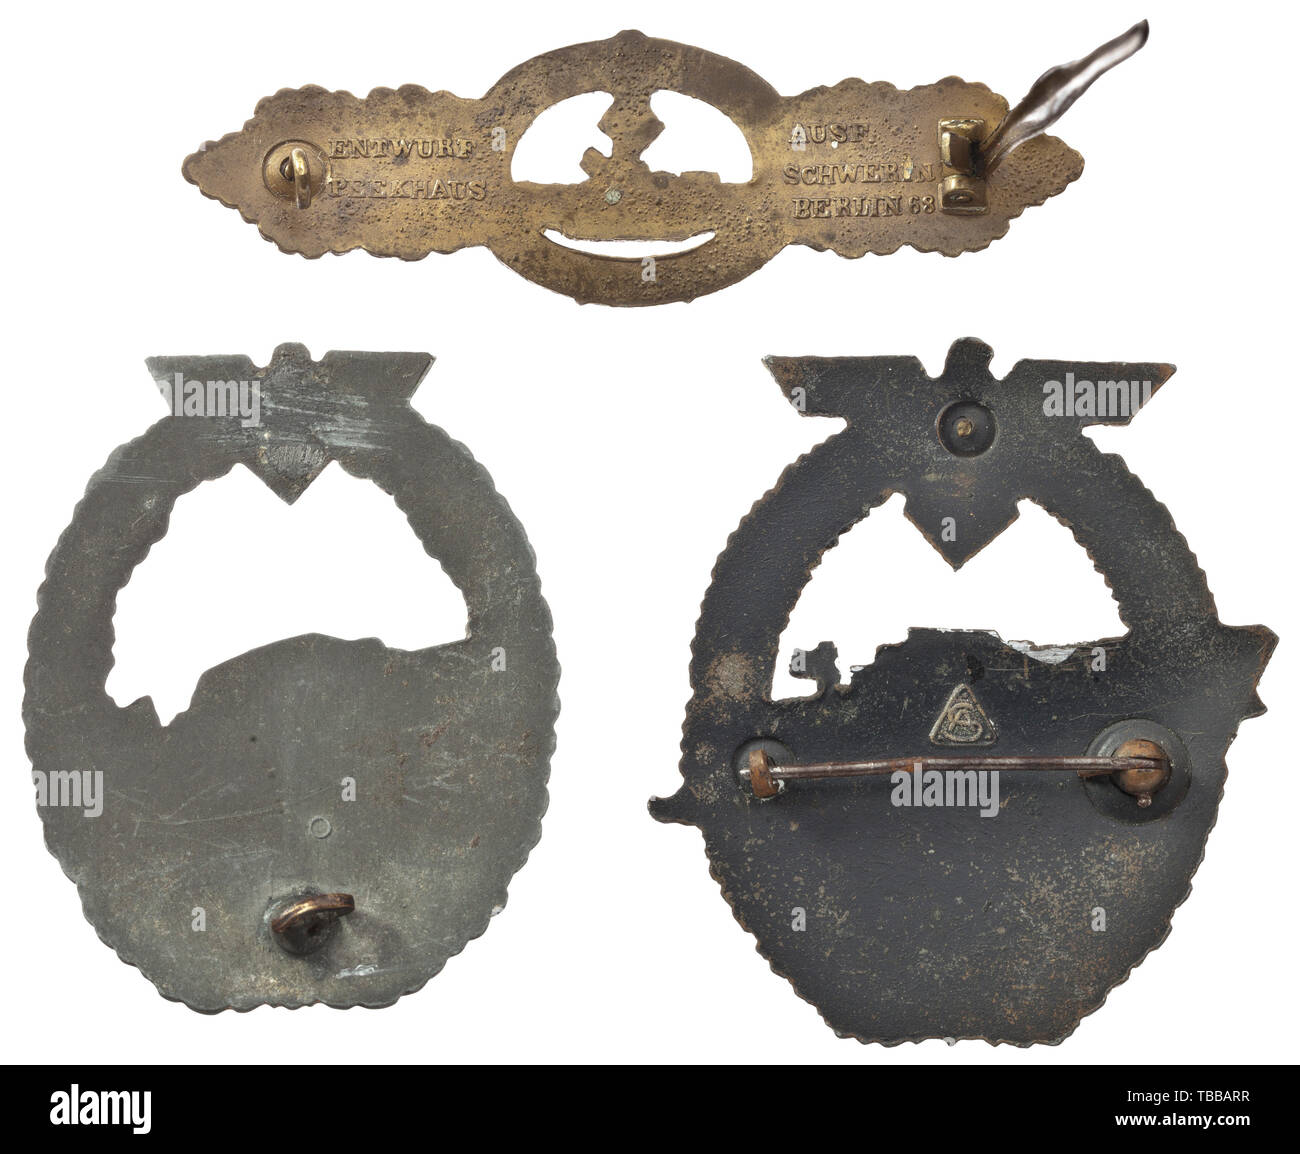 Speedboat war badges and a U-Boat Combat Clasp - three examples, S-boat war badge of first model with small boat (type S-30) made of zinc by Steinhauer & Lück in Lüdenscheid. Massively moulded, lightly convex example in initial form with so-called ring identification. Pin hinge missing, gilding etc. migrated. Width 44.2 mm. Weight 29.5 g. A further badge of 2nd model showing type S-38 (large boat) made of zinc by the firm Adolf Scholze with known triangular firm logo, in good condition. Pin rusty, upper safety hook missing. Width 54.5 mm (boat/wave). Weight 32 g. U-boat Com, Editorial-Use-Only Stock Photo